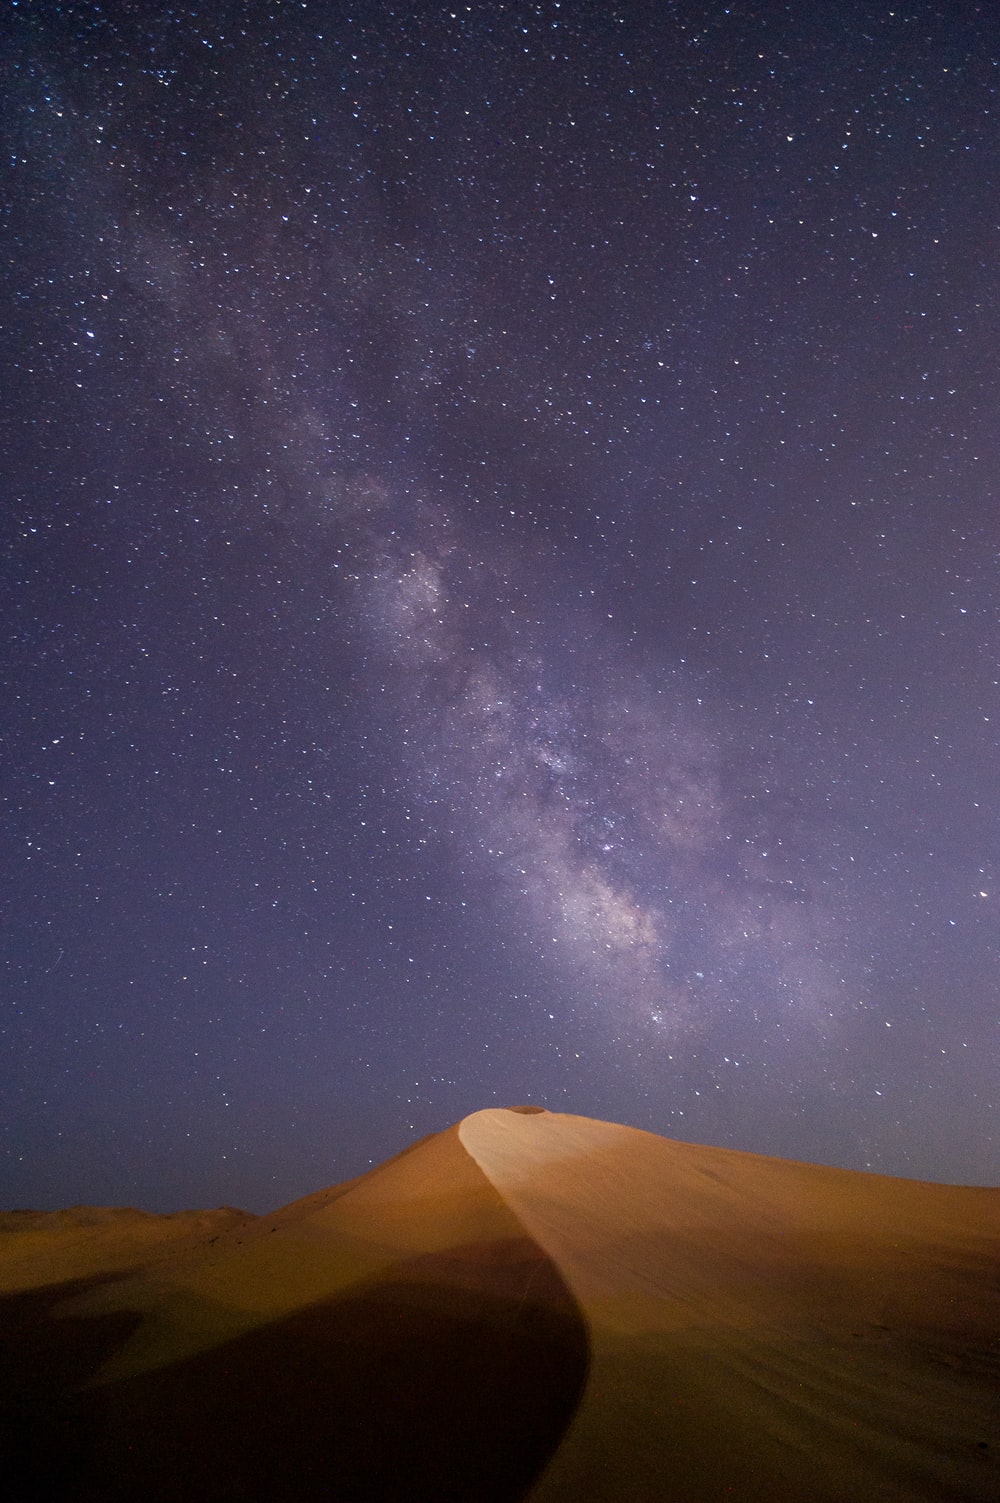 Desert Night Sky Picture. Download Free Image